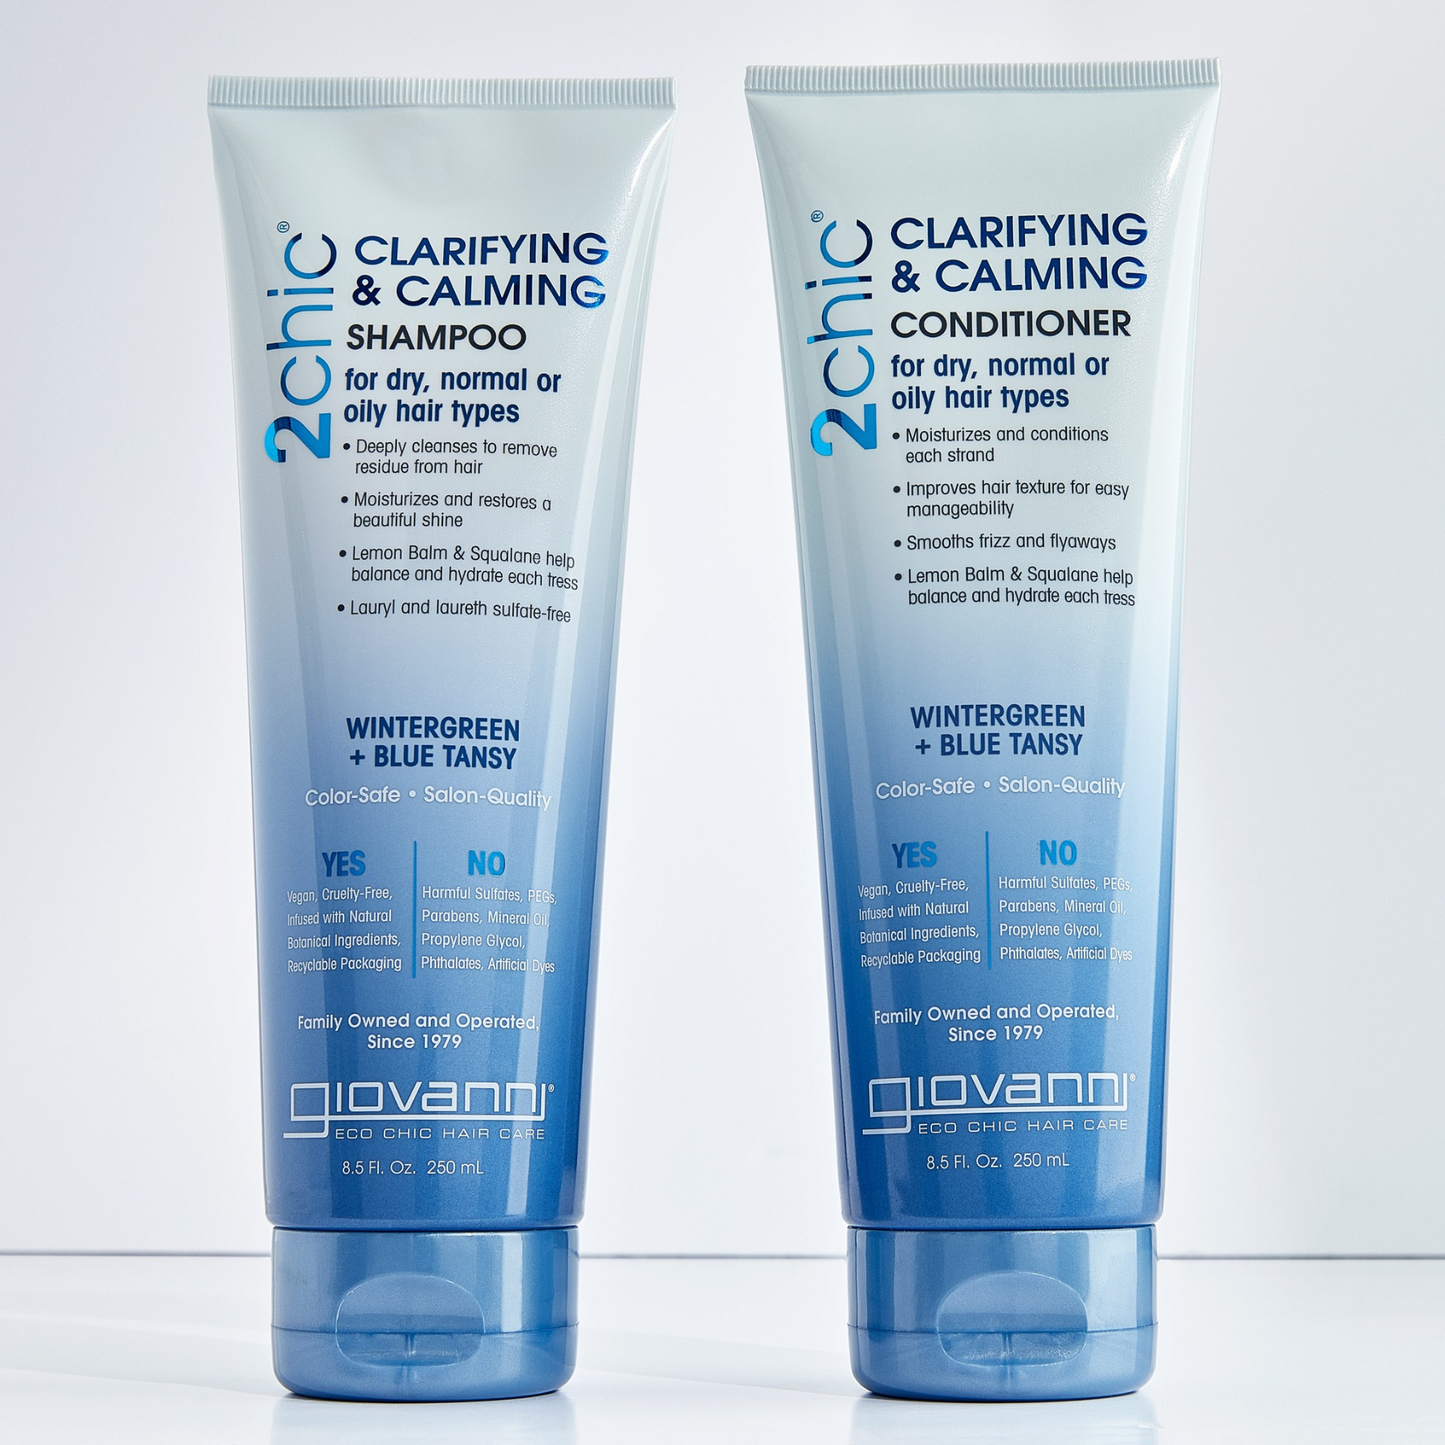 Giovanni 2Chic Clarifying & Calming Conditioner 250mL, Balances Hair for Suppleness & Shine